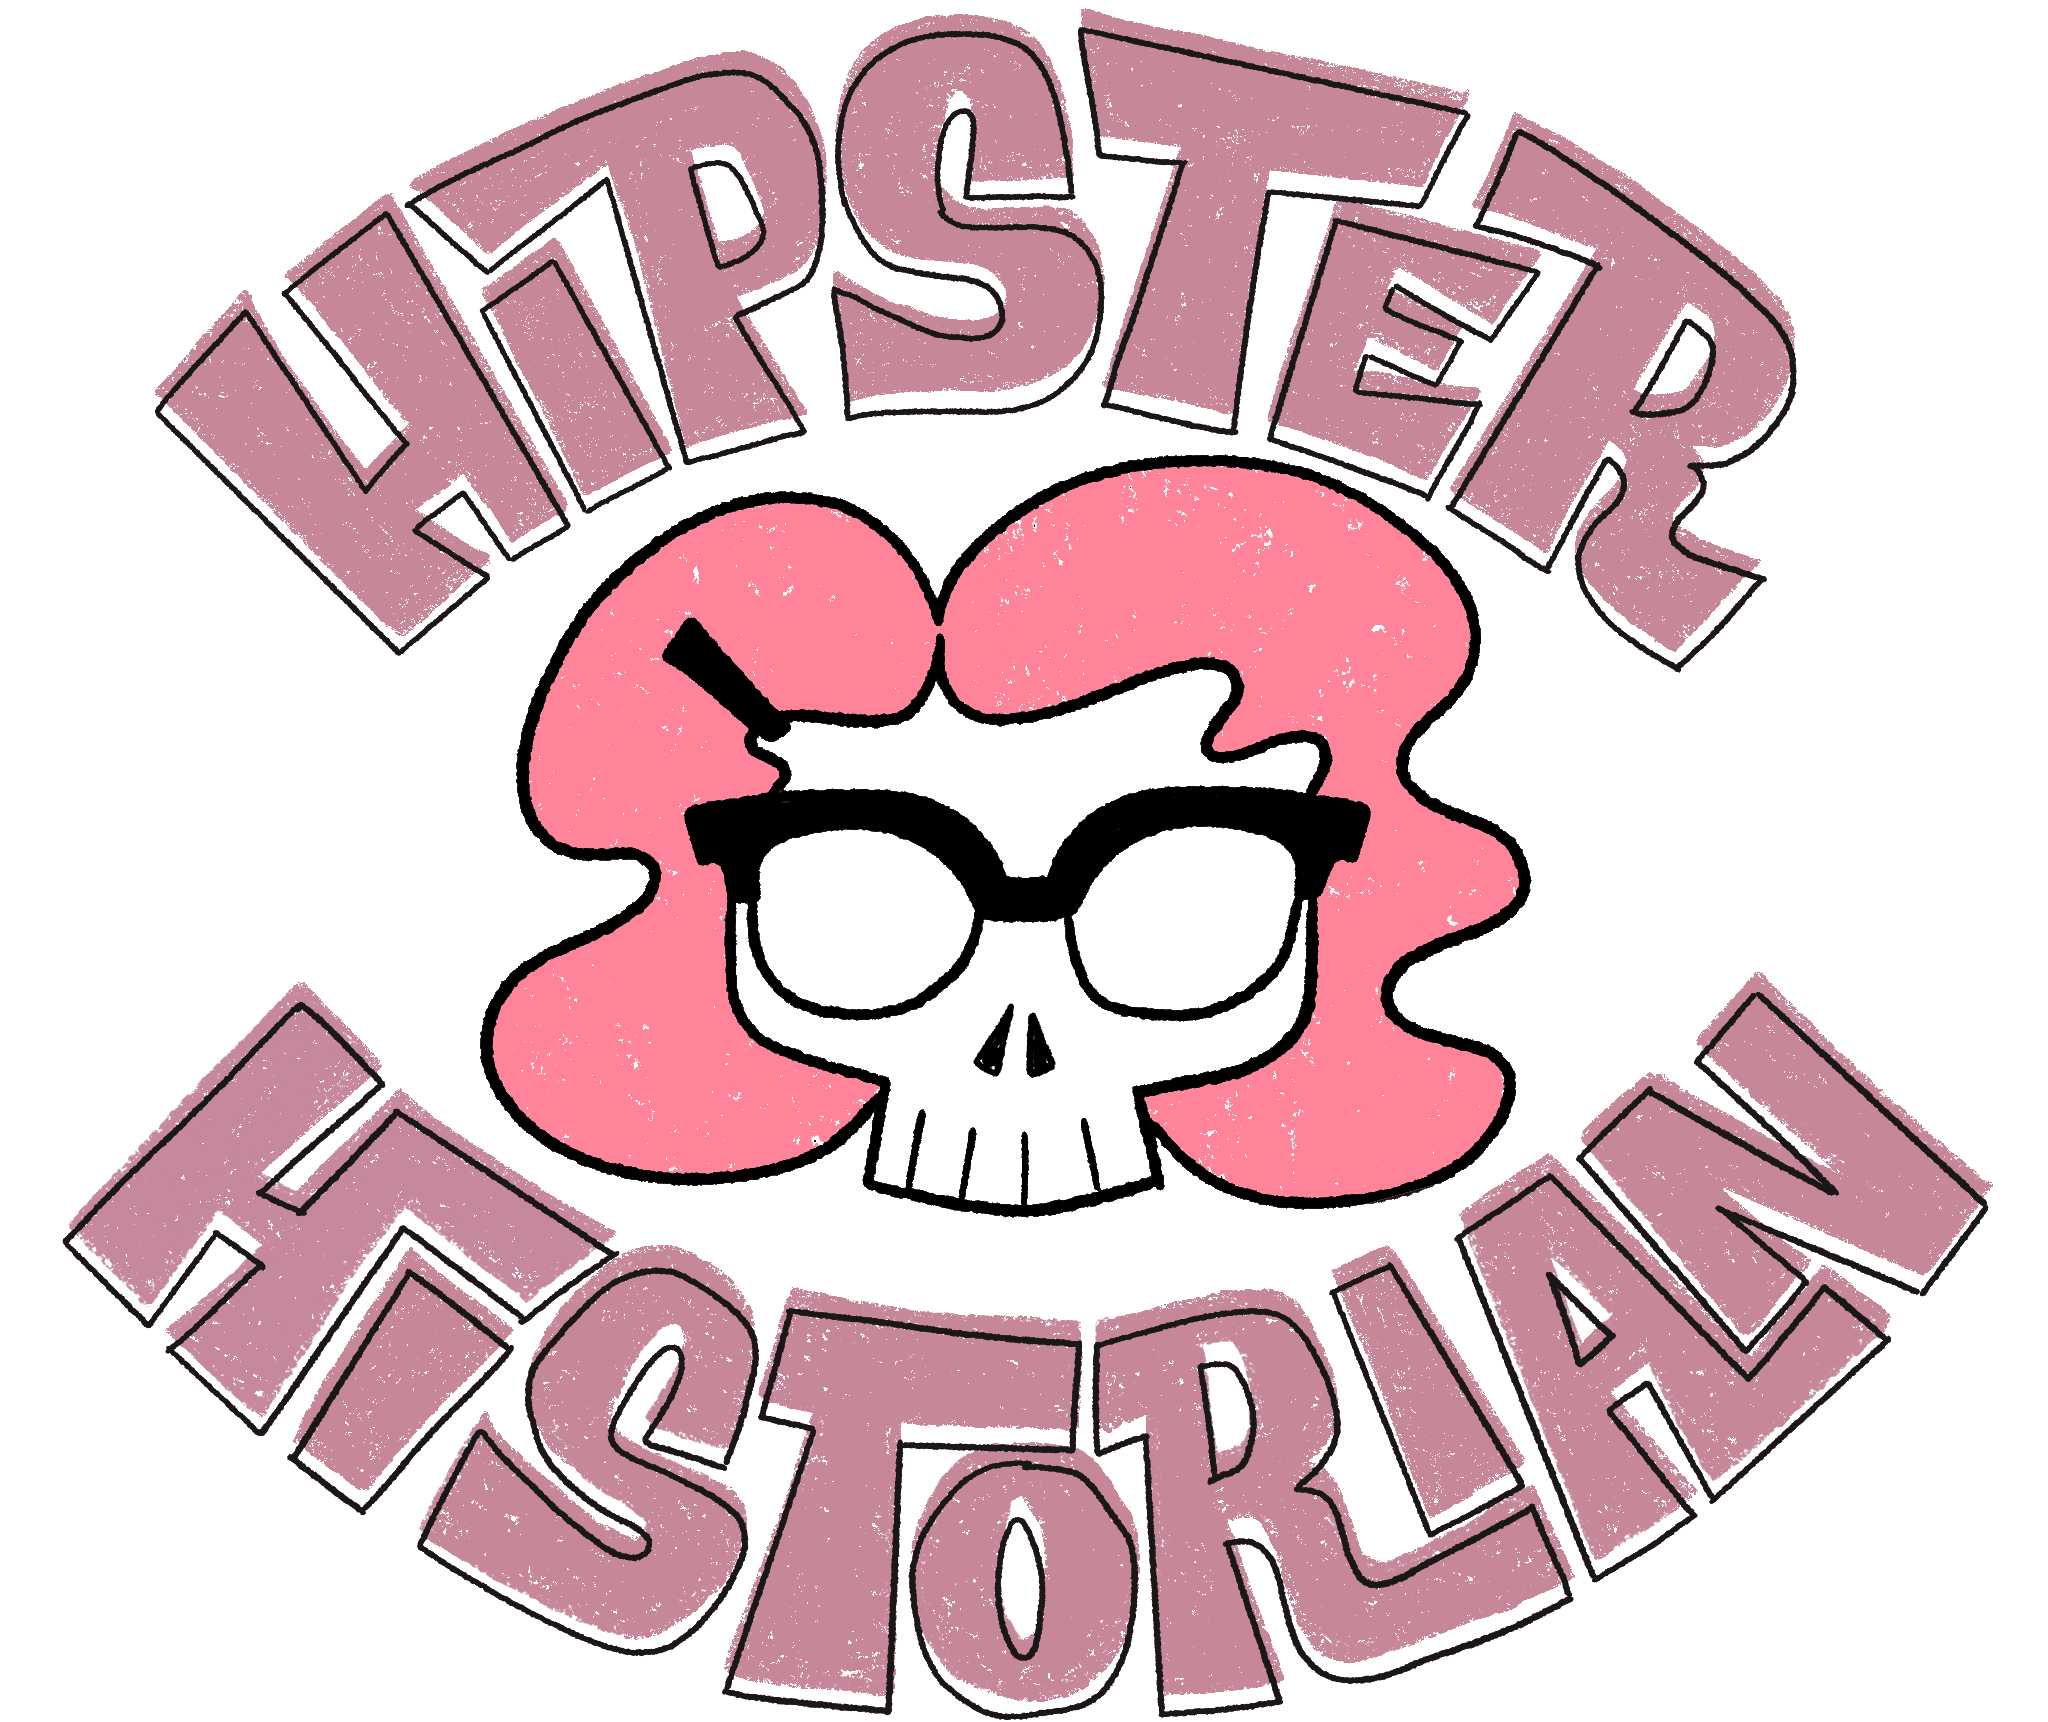 The Hipster Historian